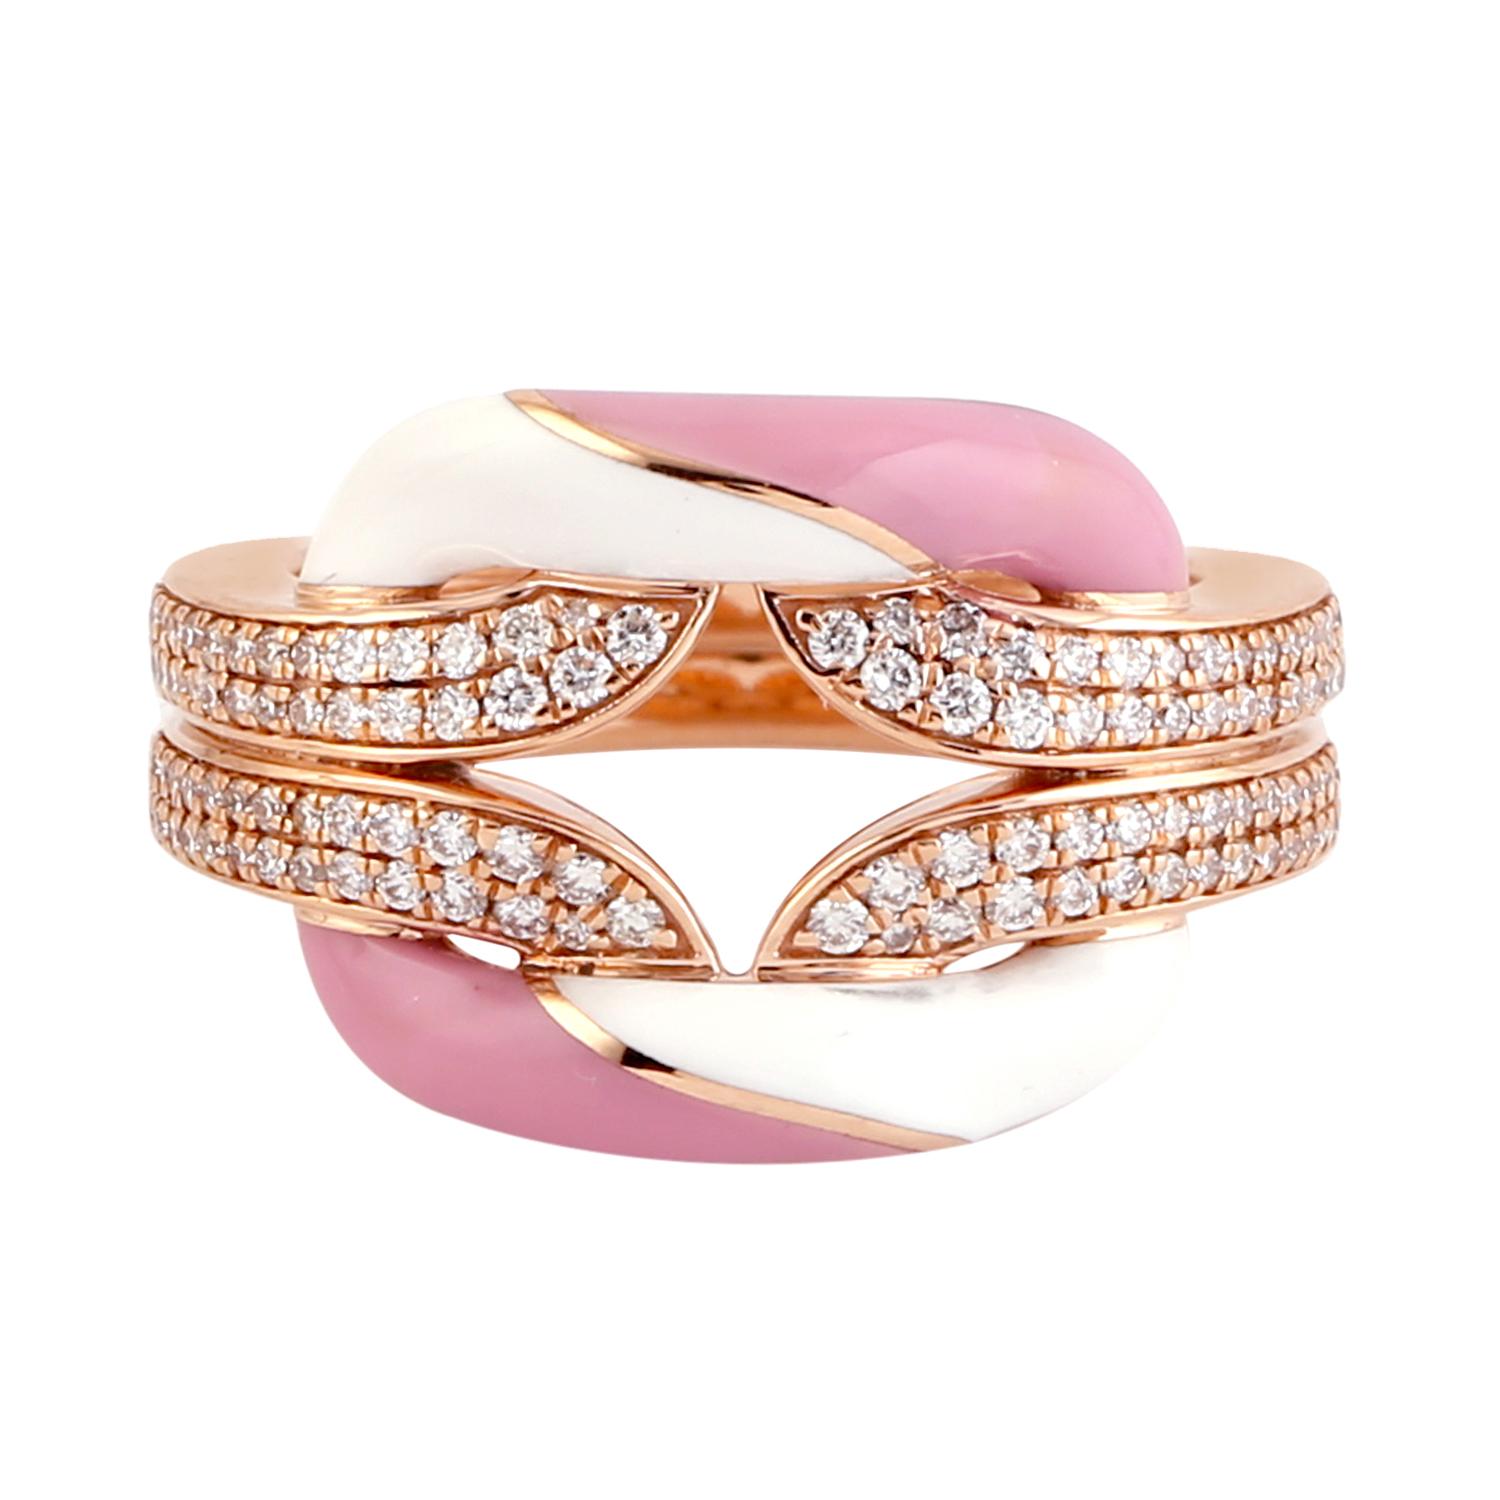 Pink & White Ceramic Inlay Ring with Vs Diamonds Made in 18k Rose Gold For Sale 1